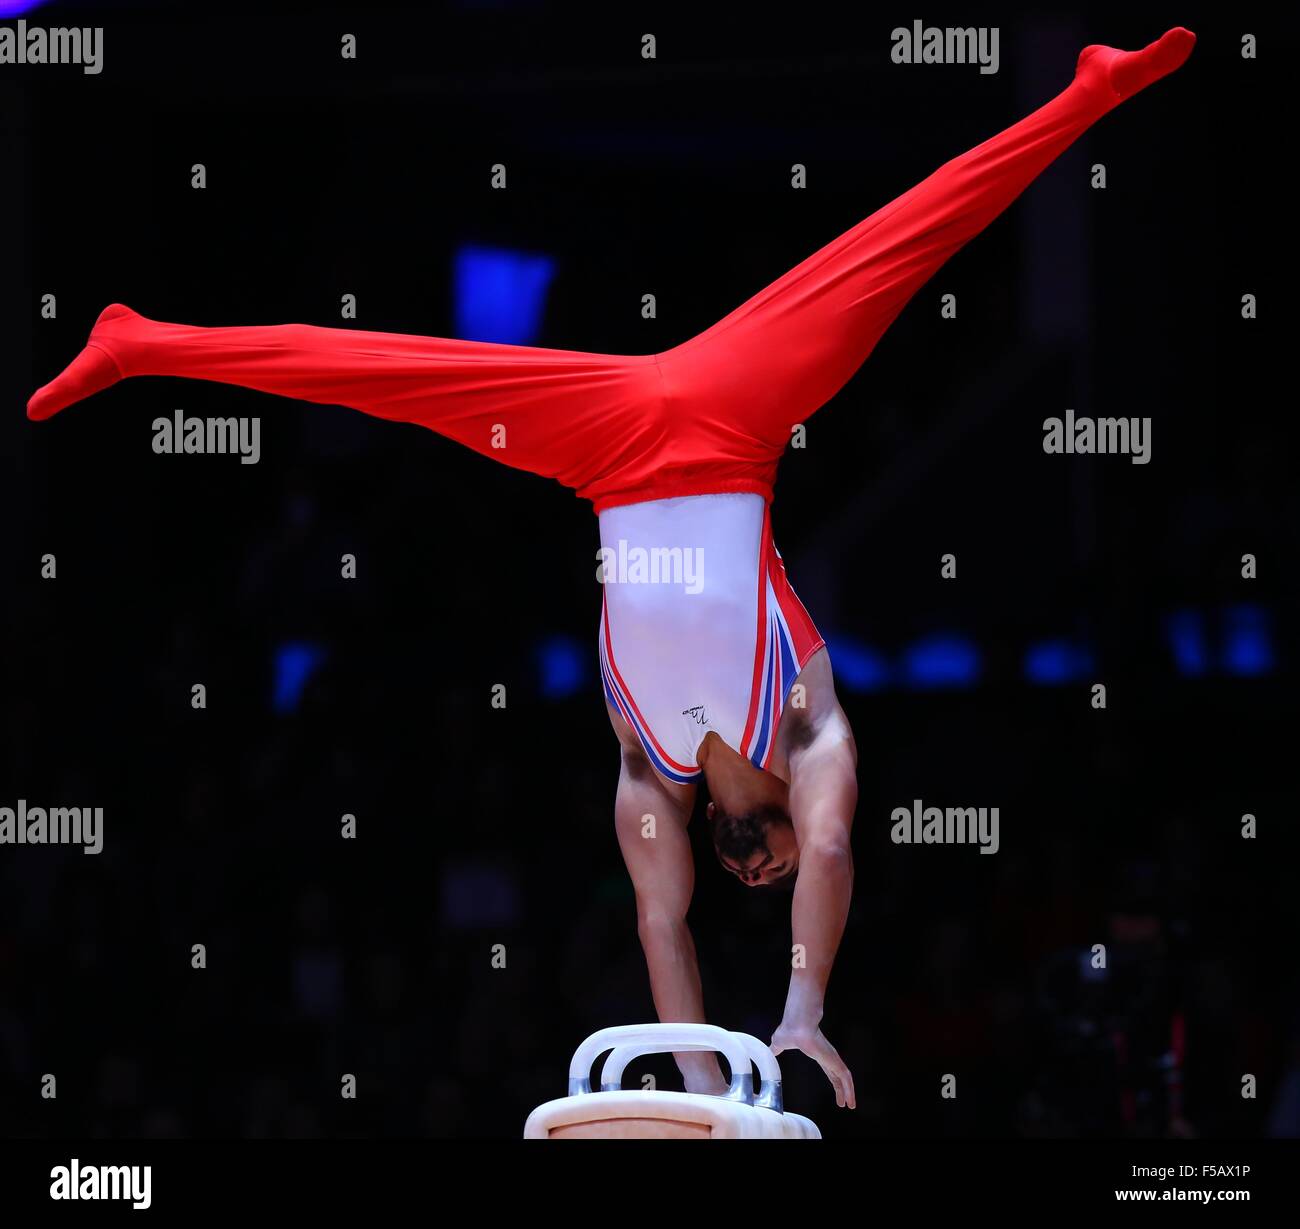 Glasgow, Scotland. 31st Oct, 2015. Louis Smith of Great Britain competes in the Men's Pommel Horse Final at the 46th World Artistic Gymnastics Championships at the SSE Hydro Arena in Glasgow, Scotland, Great Britain on Oct. 31, 2015. © Gong Bing/Xinhua/Alamy Live News Stock Photo